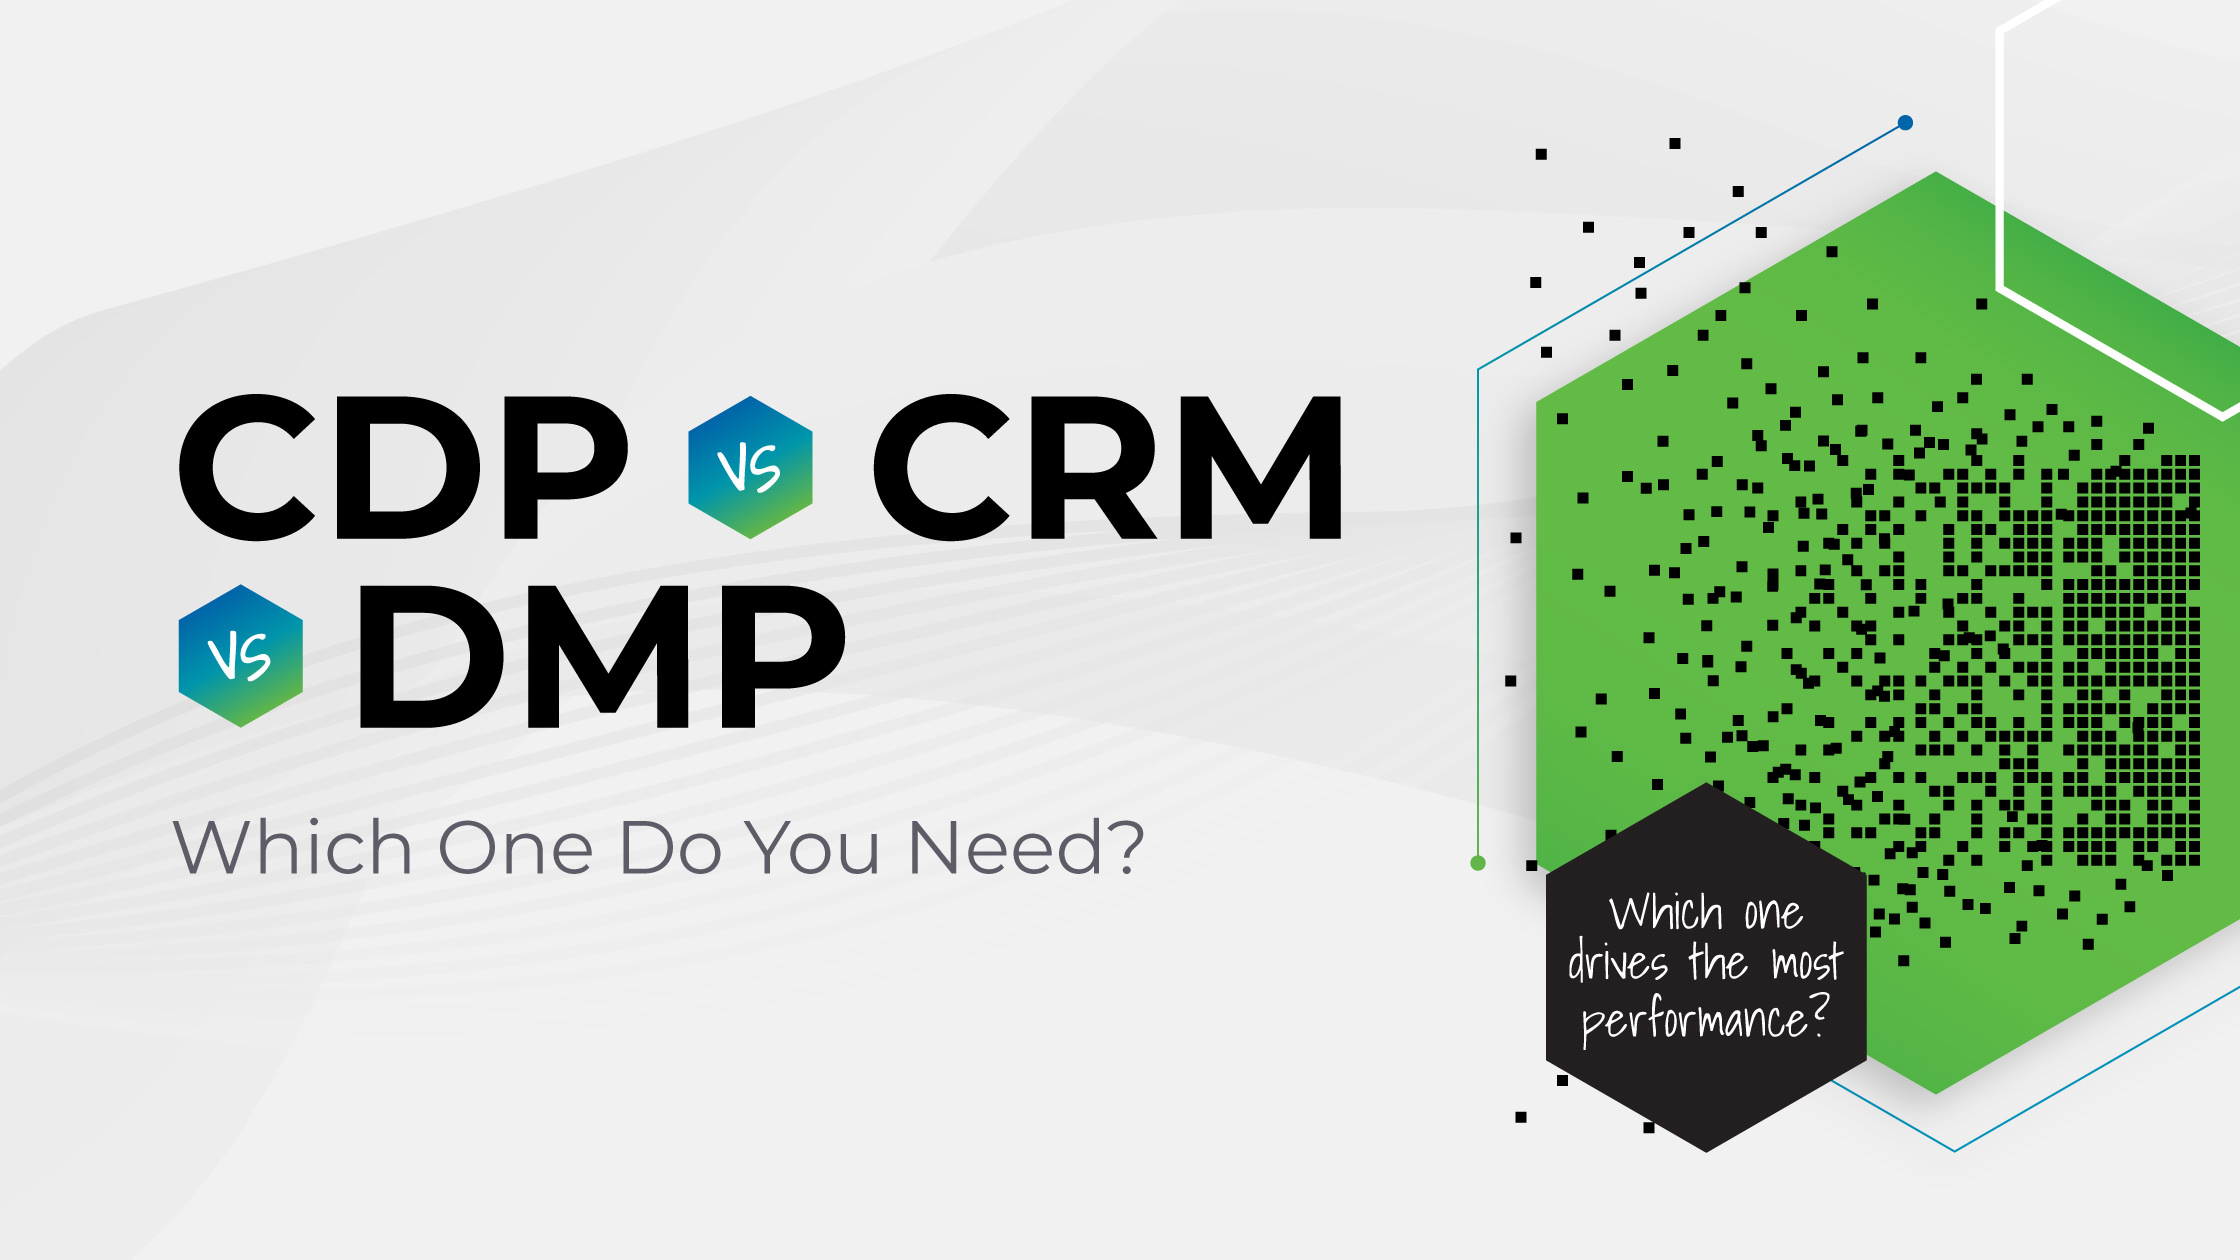 CDP vs CRM vs DMP: Which One Do You Need?